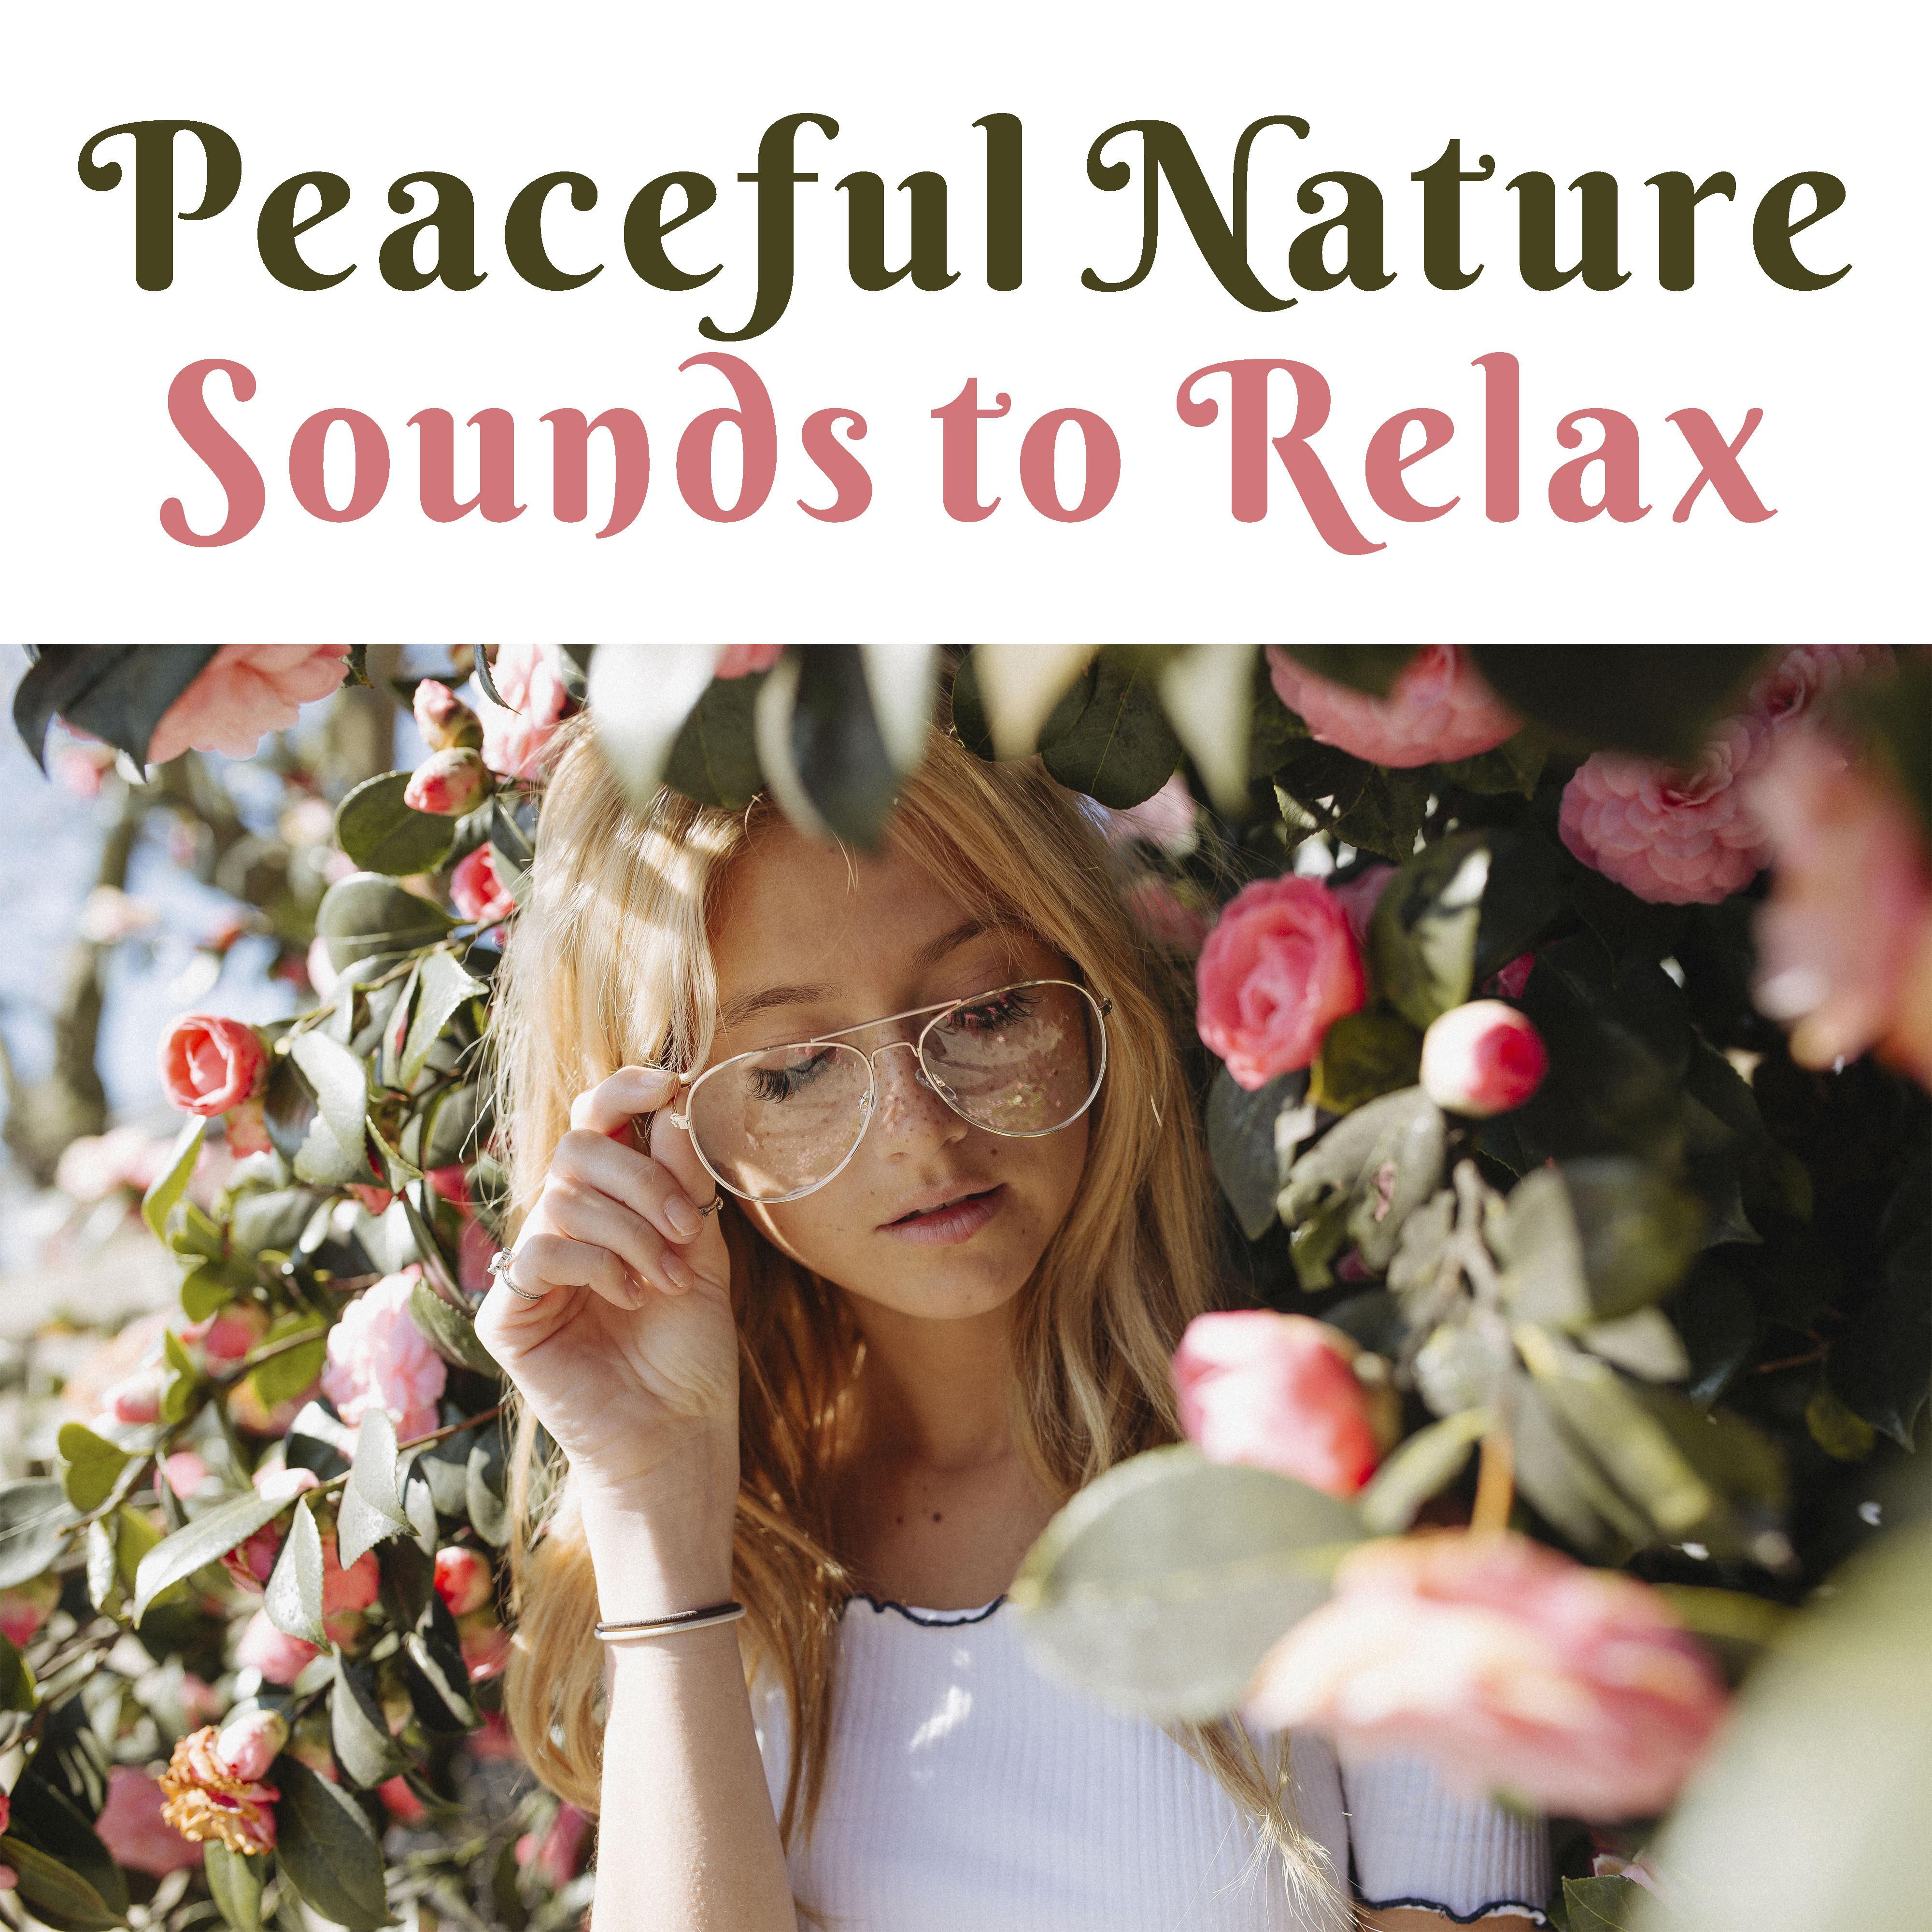 Peaceful Nature Sounds to Relax